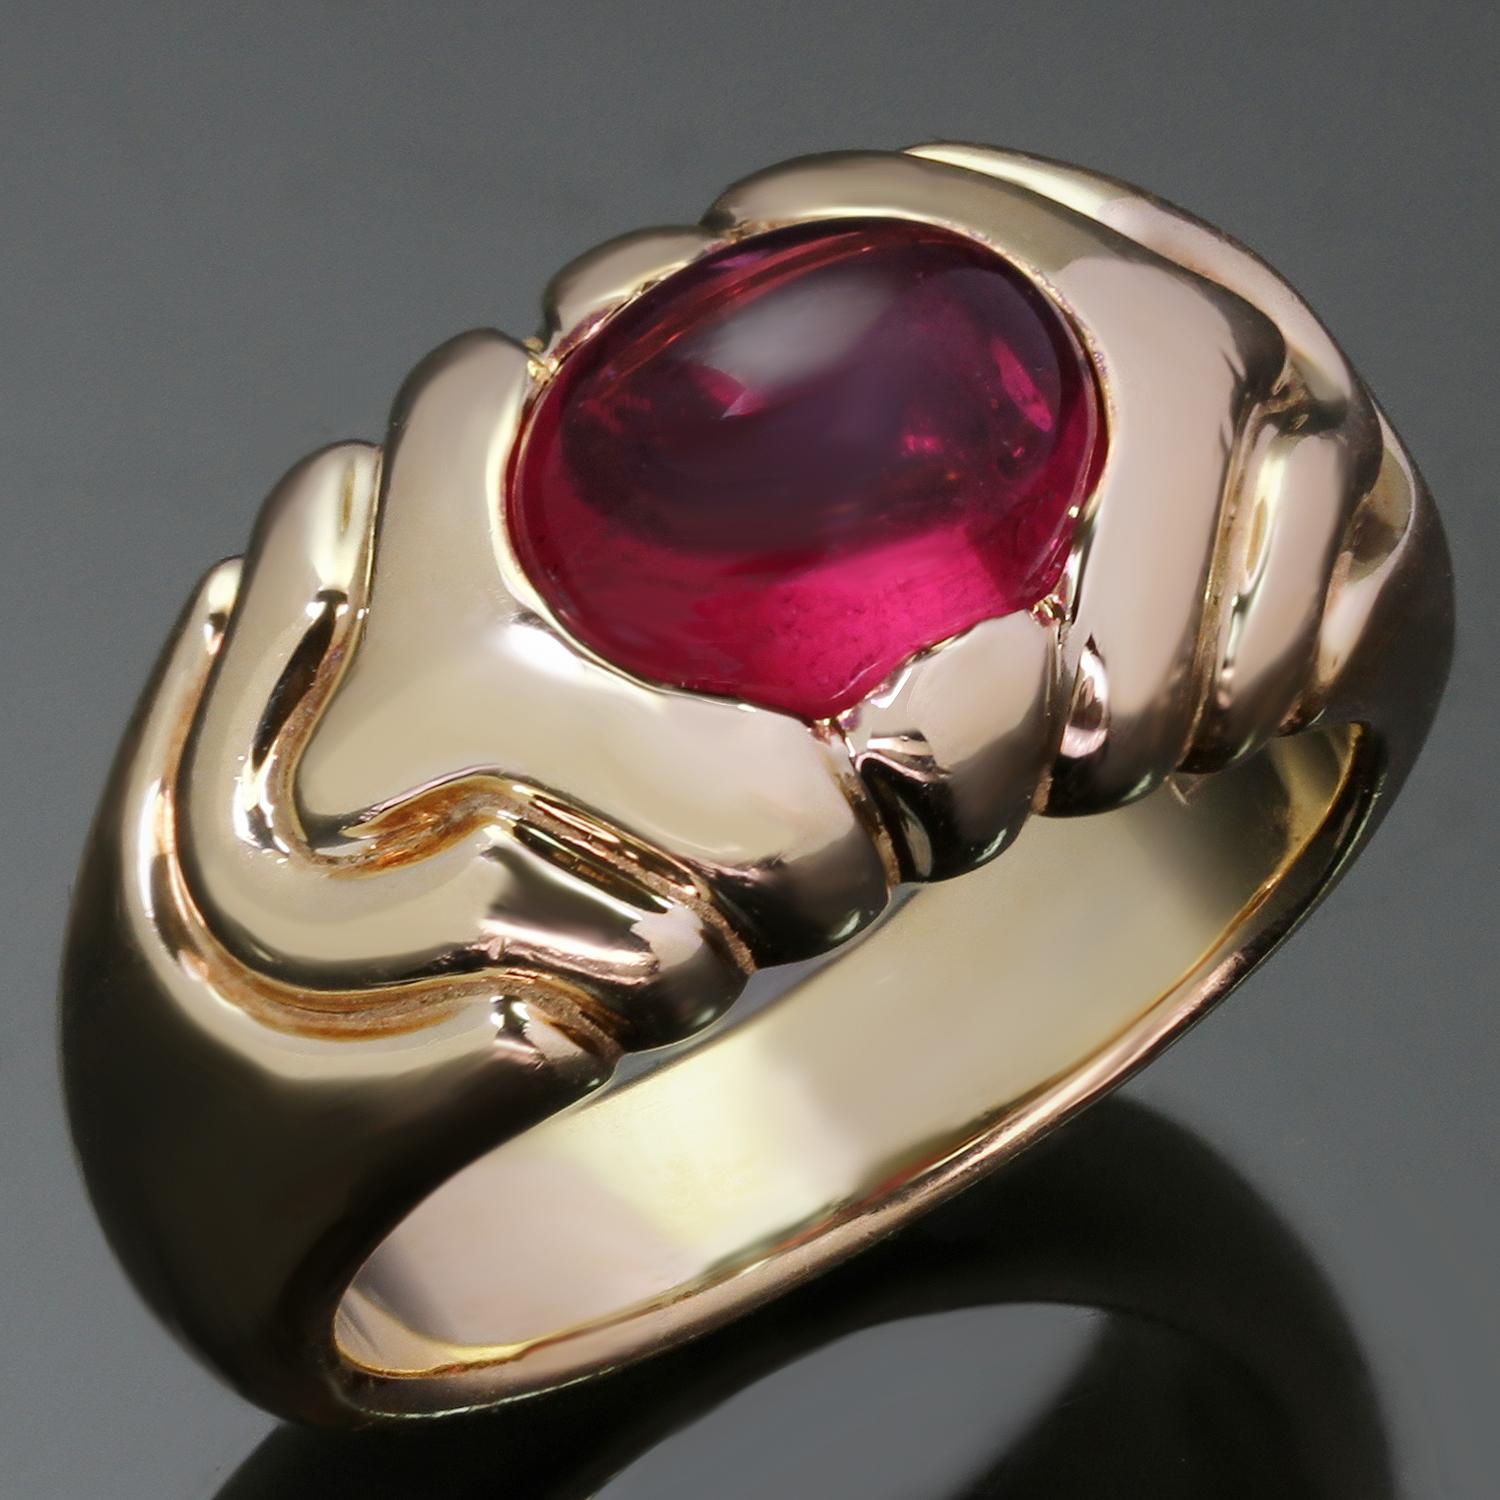 This gorgeous Bvlgari ring features a geometric design crafted in 18k yellow gold and set a cabochon oval 7.0mm x 9.0mm pink tourmaline stone. Made in Italy circa 1990s. Measurements: 0.62